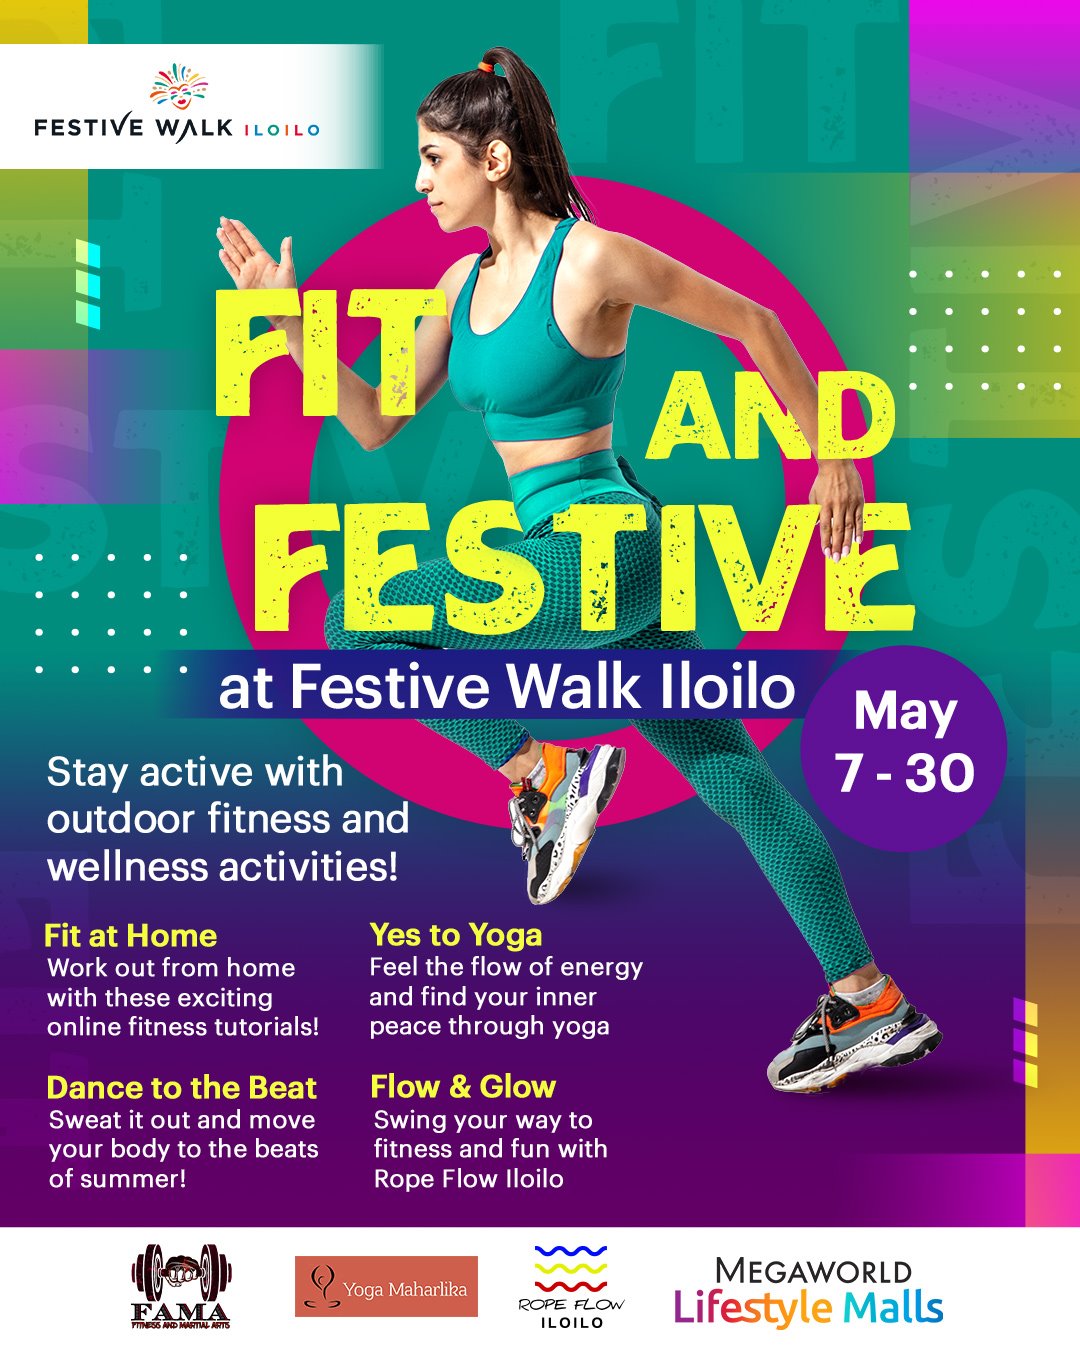 Stay in shape with Festive Walk Iloilo's 'Fit & Festive' outdoor activities!